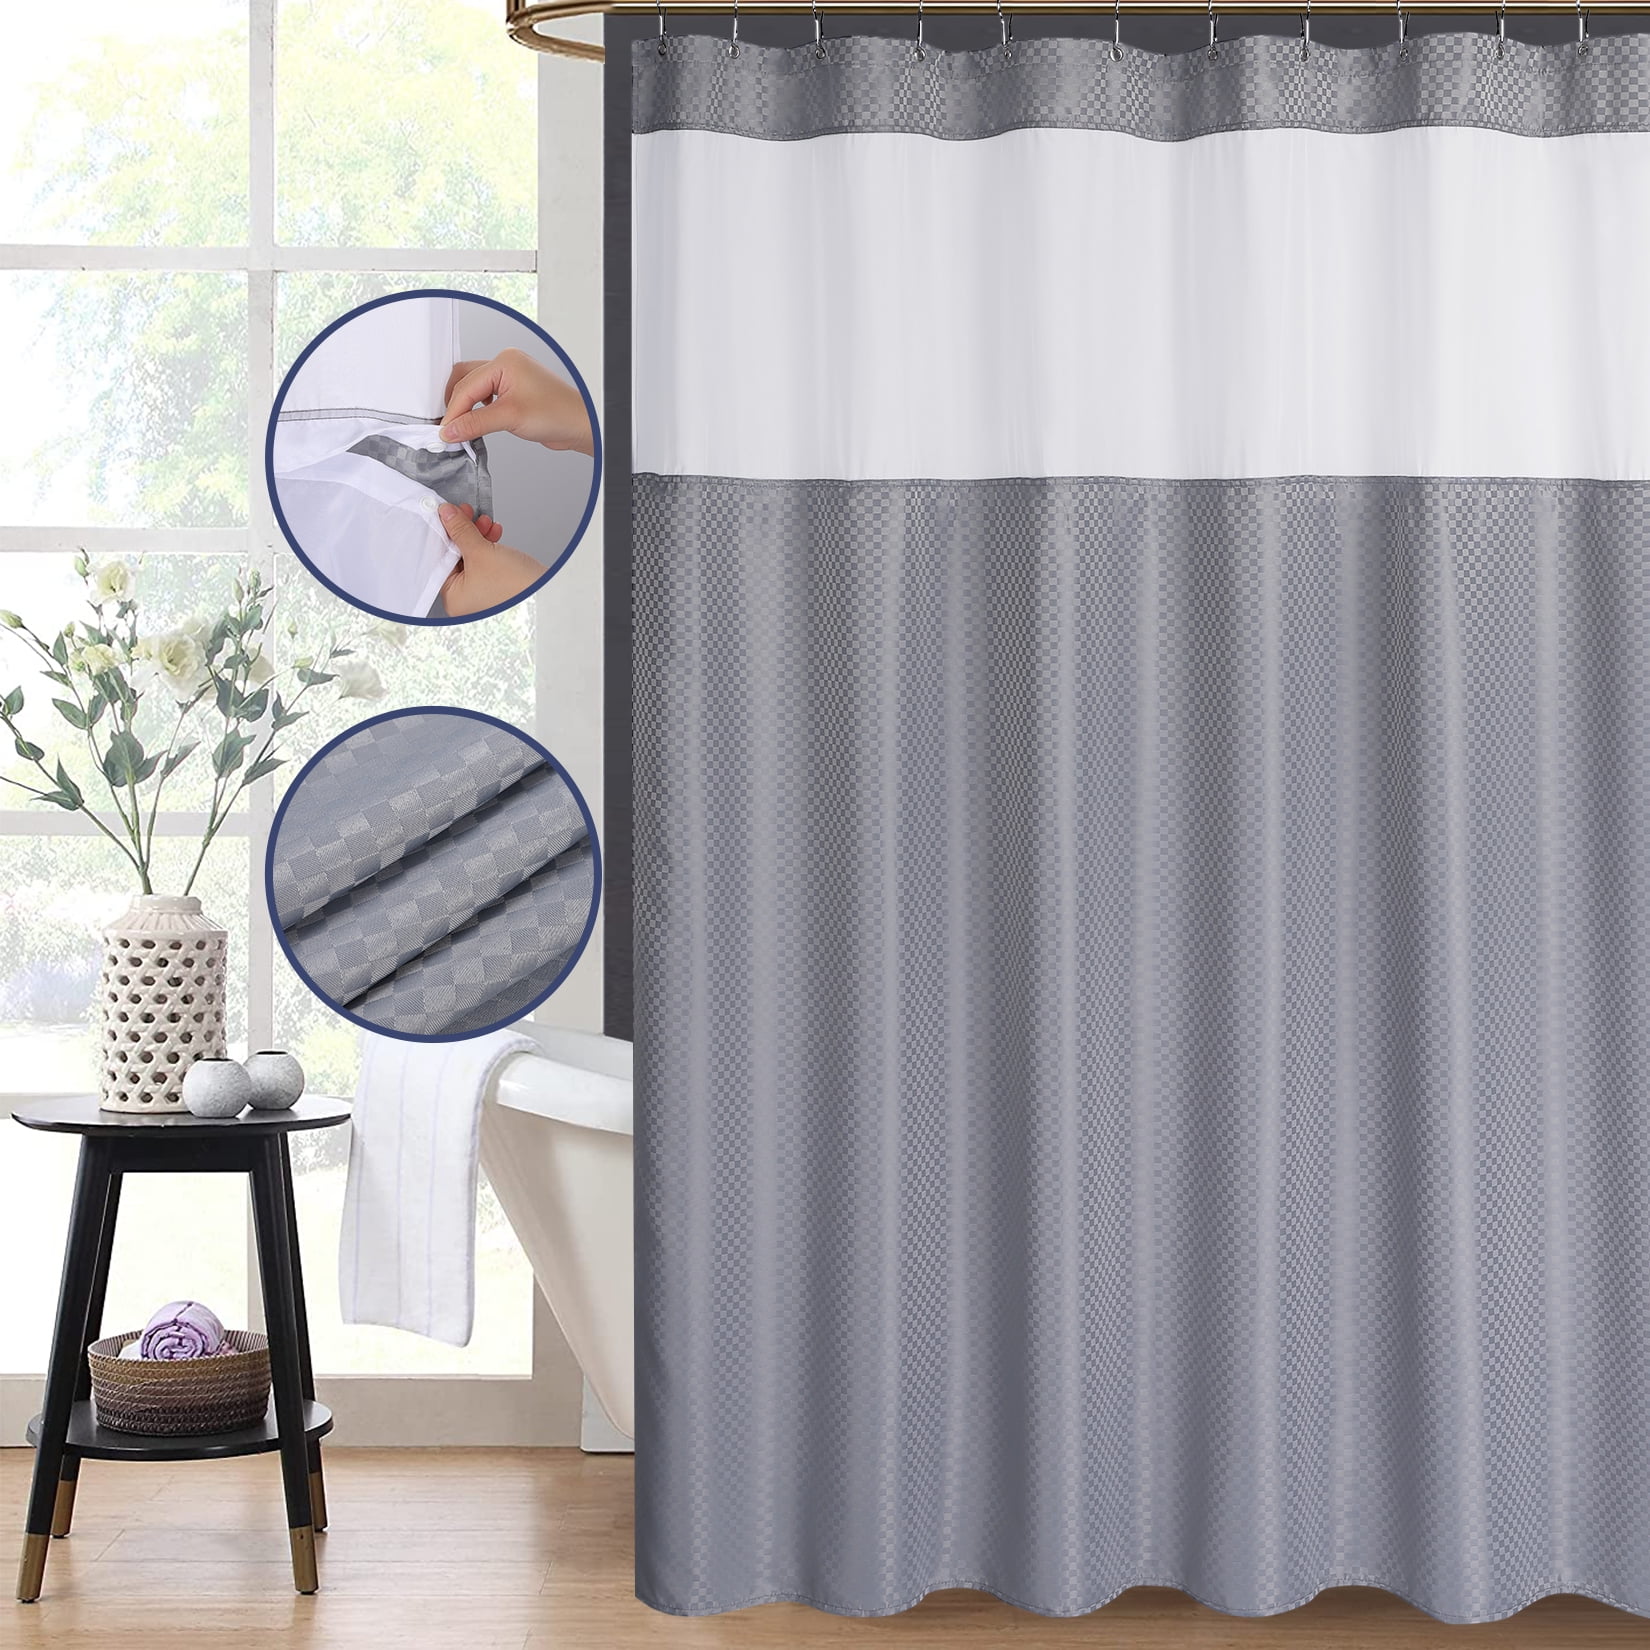 Mould Proof Resistant Waterproof Curtain Liner Set with Hooks BTTN Waffle Stall Heavy Duty Shower Curtains 183x91cm,Black 280 GSM Hotel Quality Weighted Fabric Shower Curtain for Bathroom